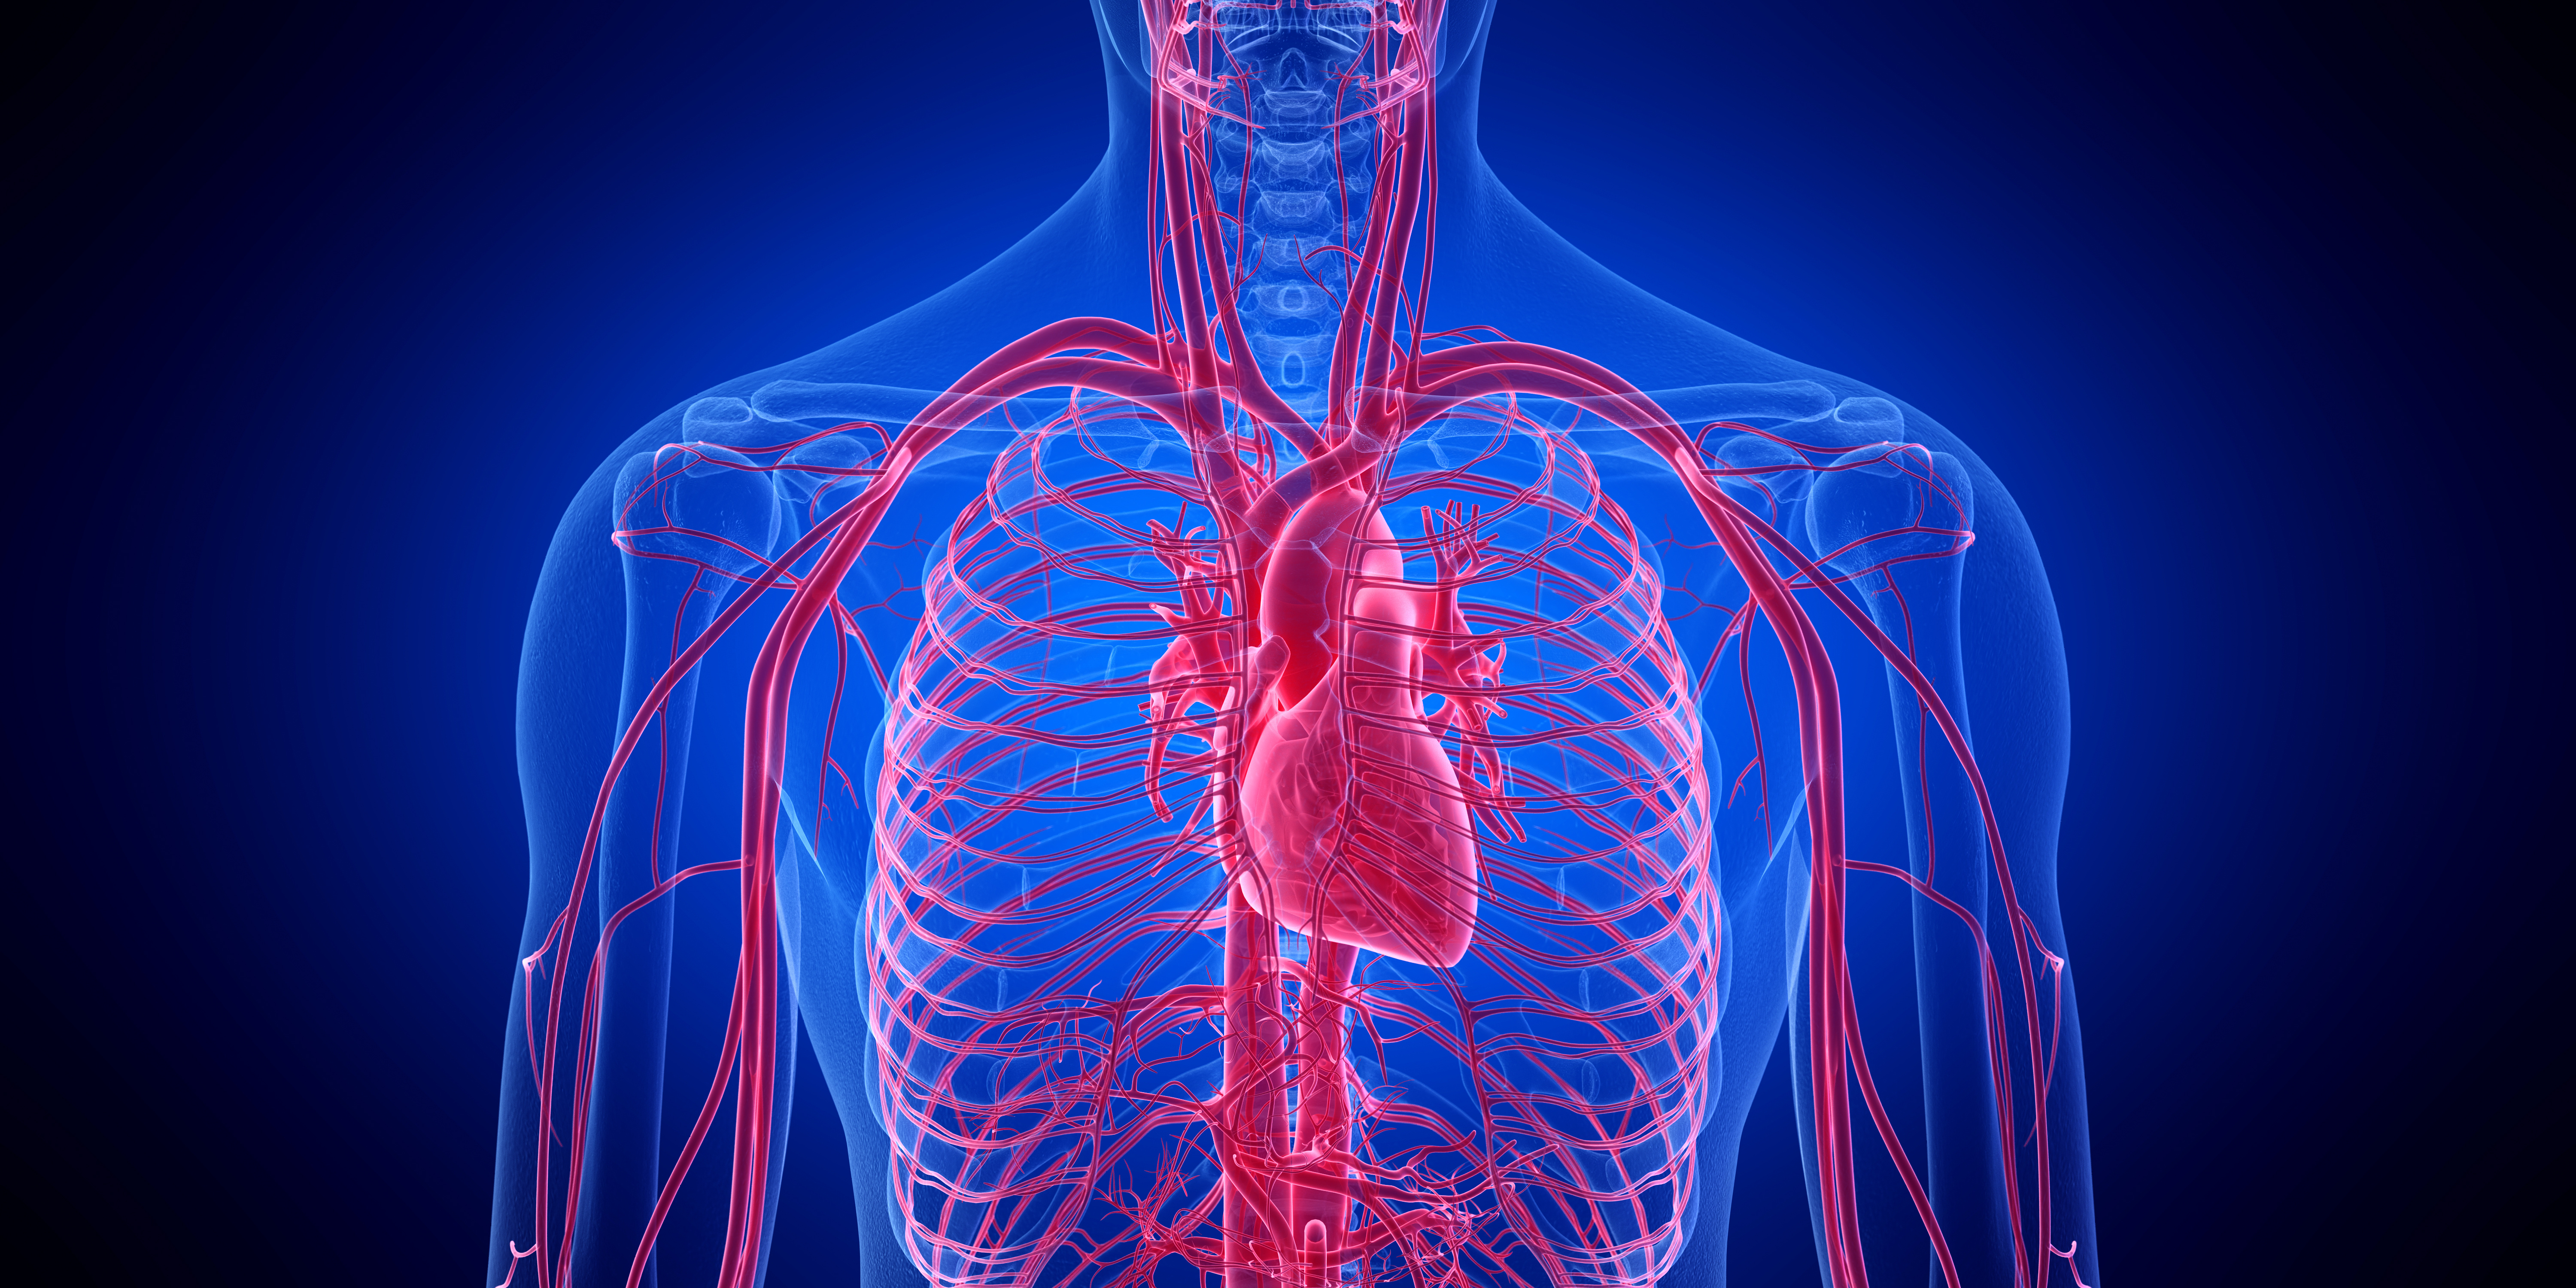 3d rendered medically accurate illustration of the human heart - Overview of anatomy and physiology related to vascular access veins of the chest and neck